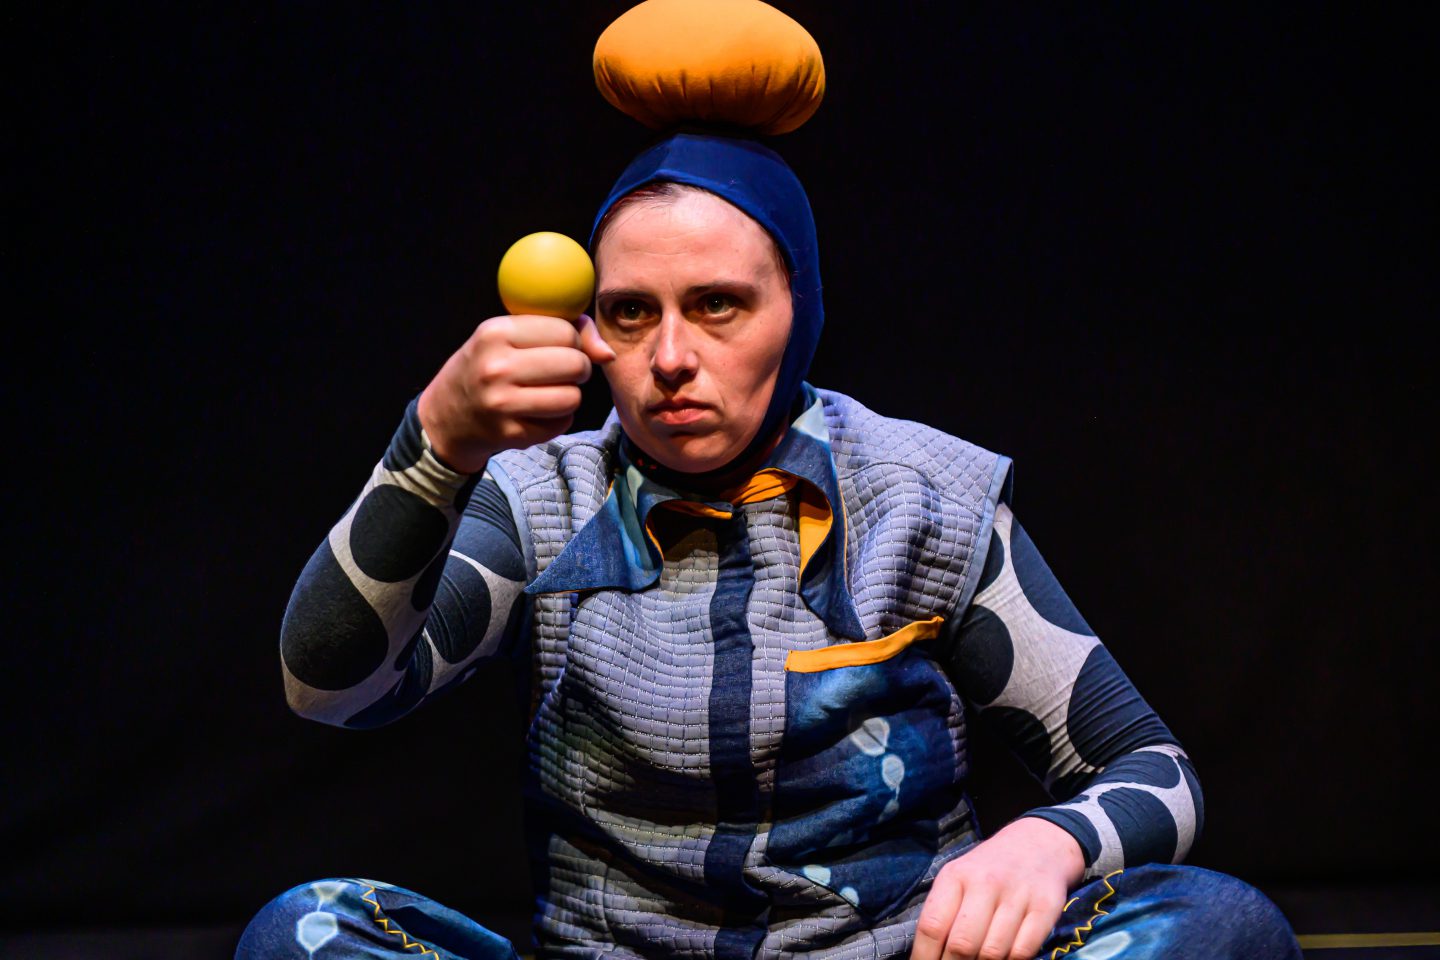 Bigkidlittlekid - a performer in blue with a hat with a giant bobble. she balances a yellow ball on her fist and looks intently at it